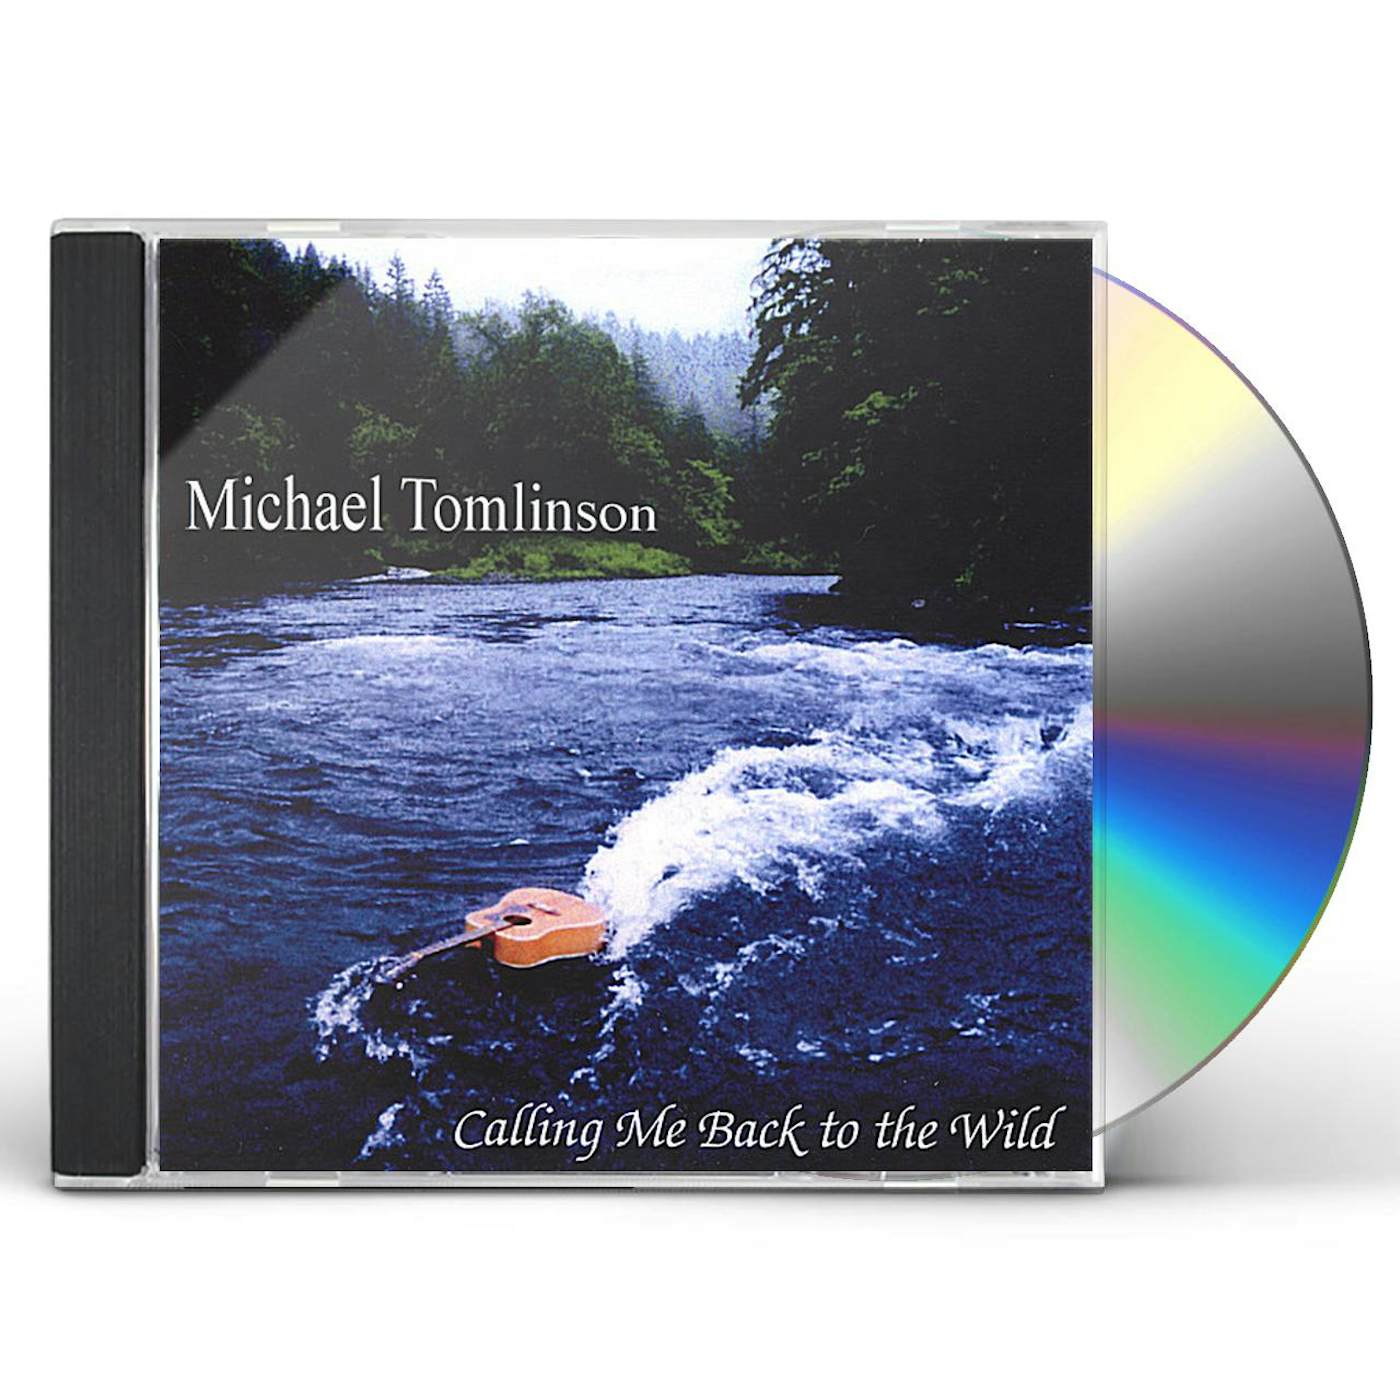 Michael Tomlinson CALLING ME BACK TO THE WILD CD